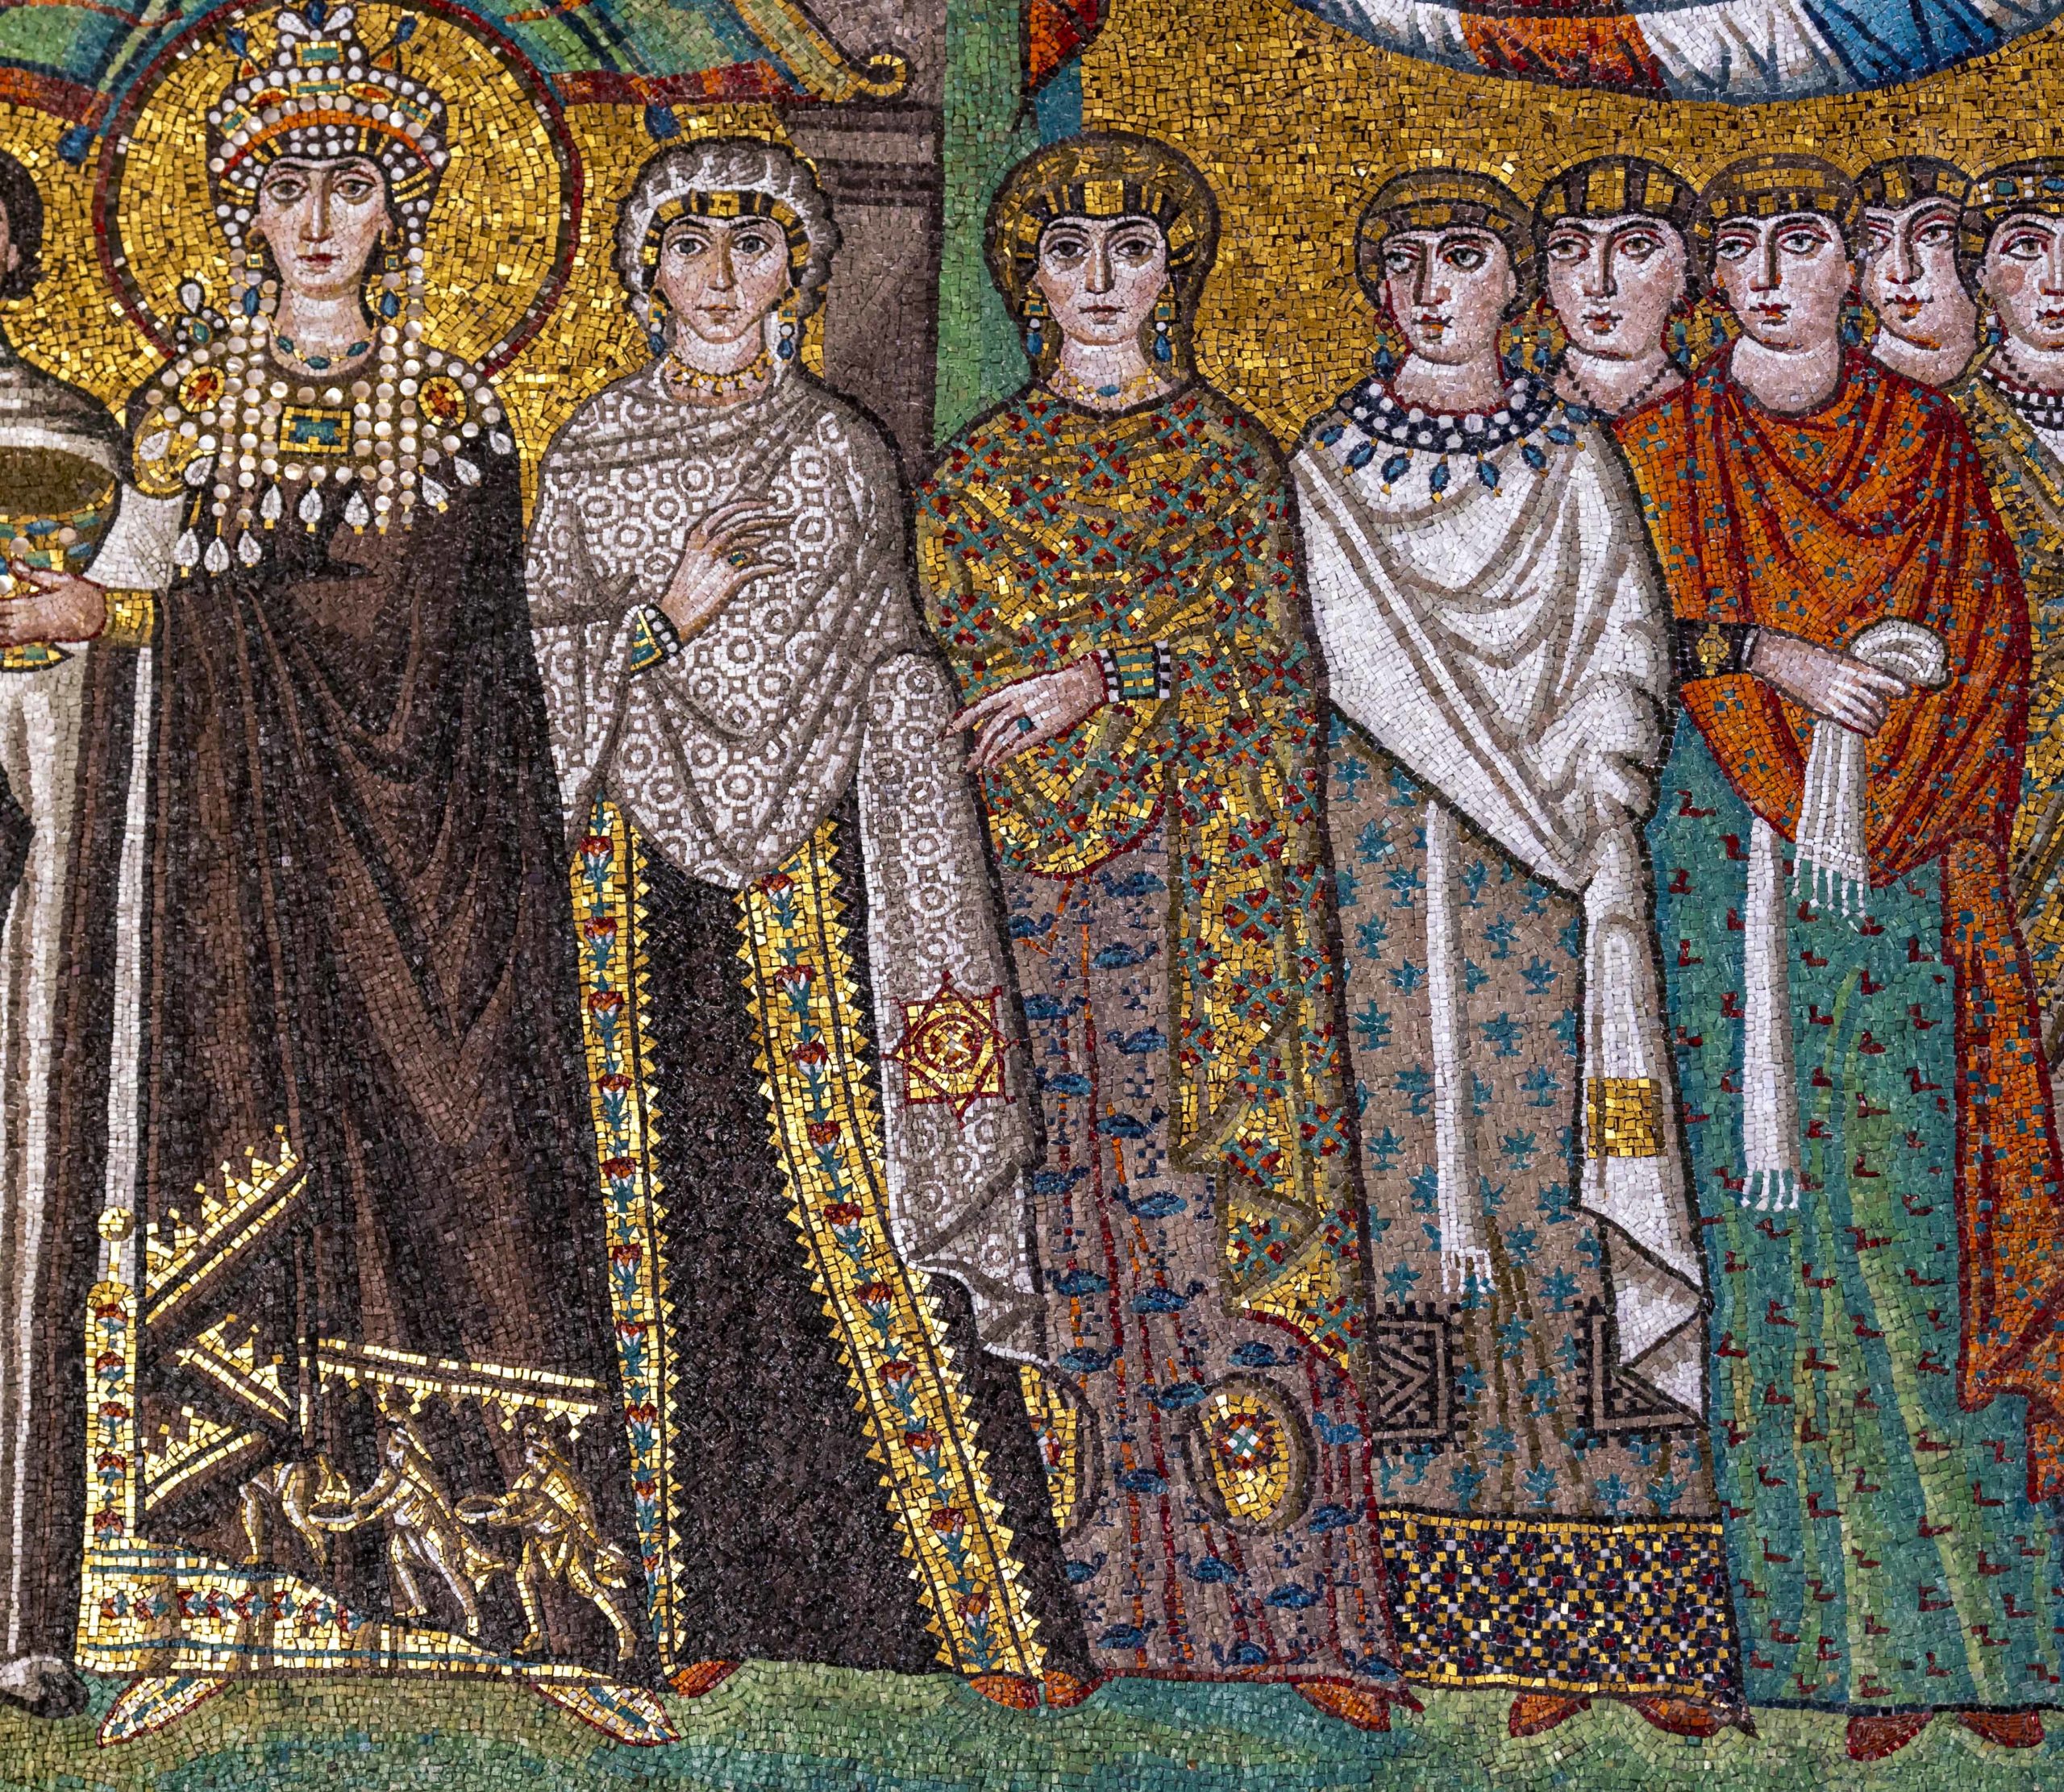 Detail of the wall mosaic depicting the attendants of empress Theodora’s wearing luxury silk garments of diverse designs, 540s, San Vitale, Ravenna (photo: Seven Zucker, CC BY-NC-SA 2.0)